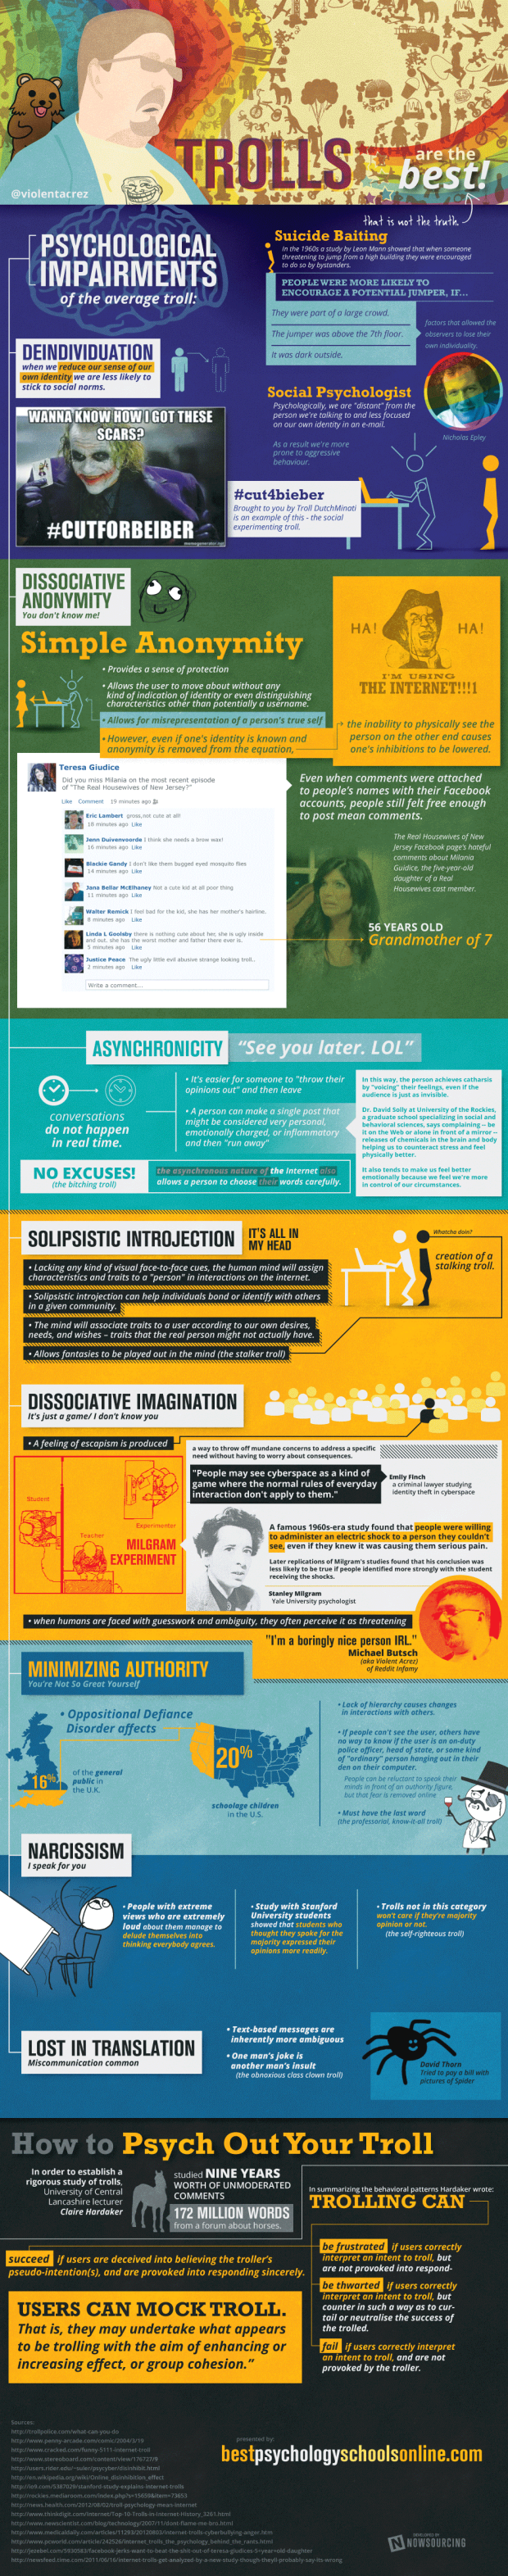 Why Do Internet Trolls Exist? [Infographic]